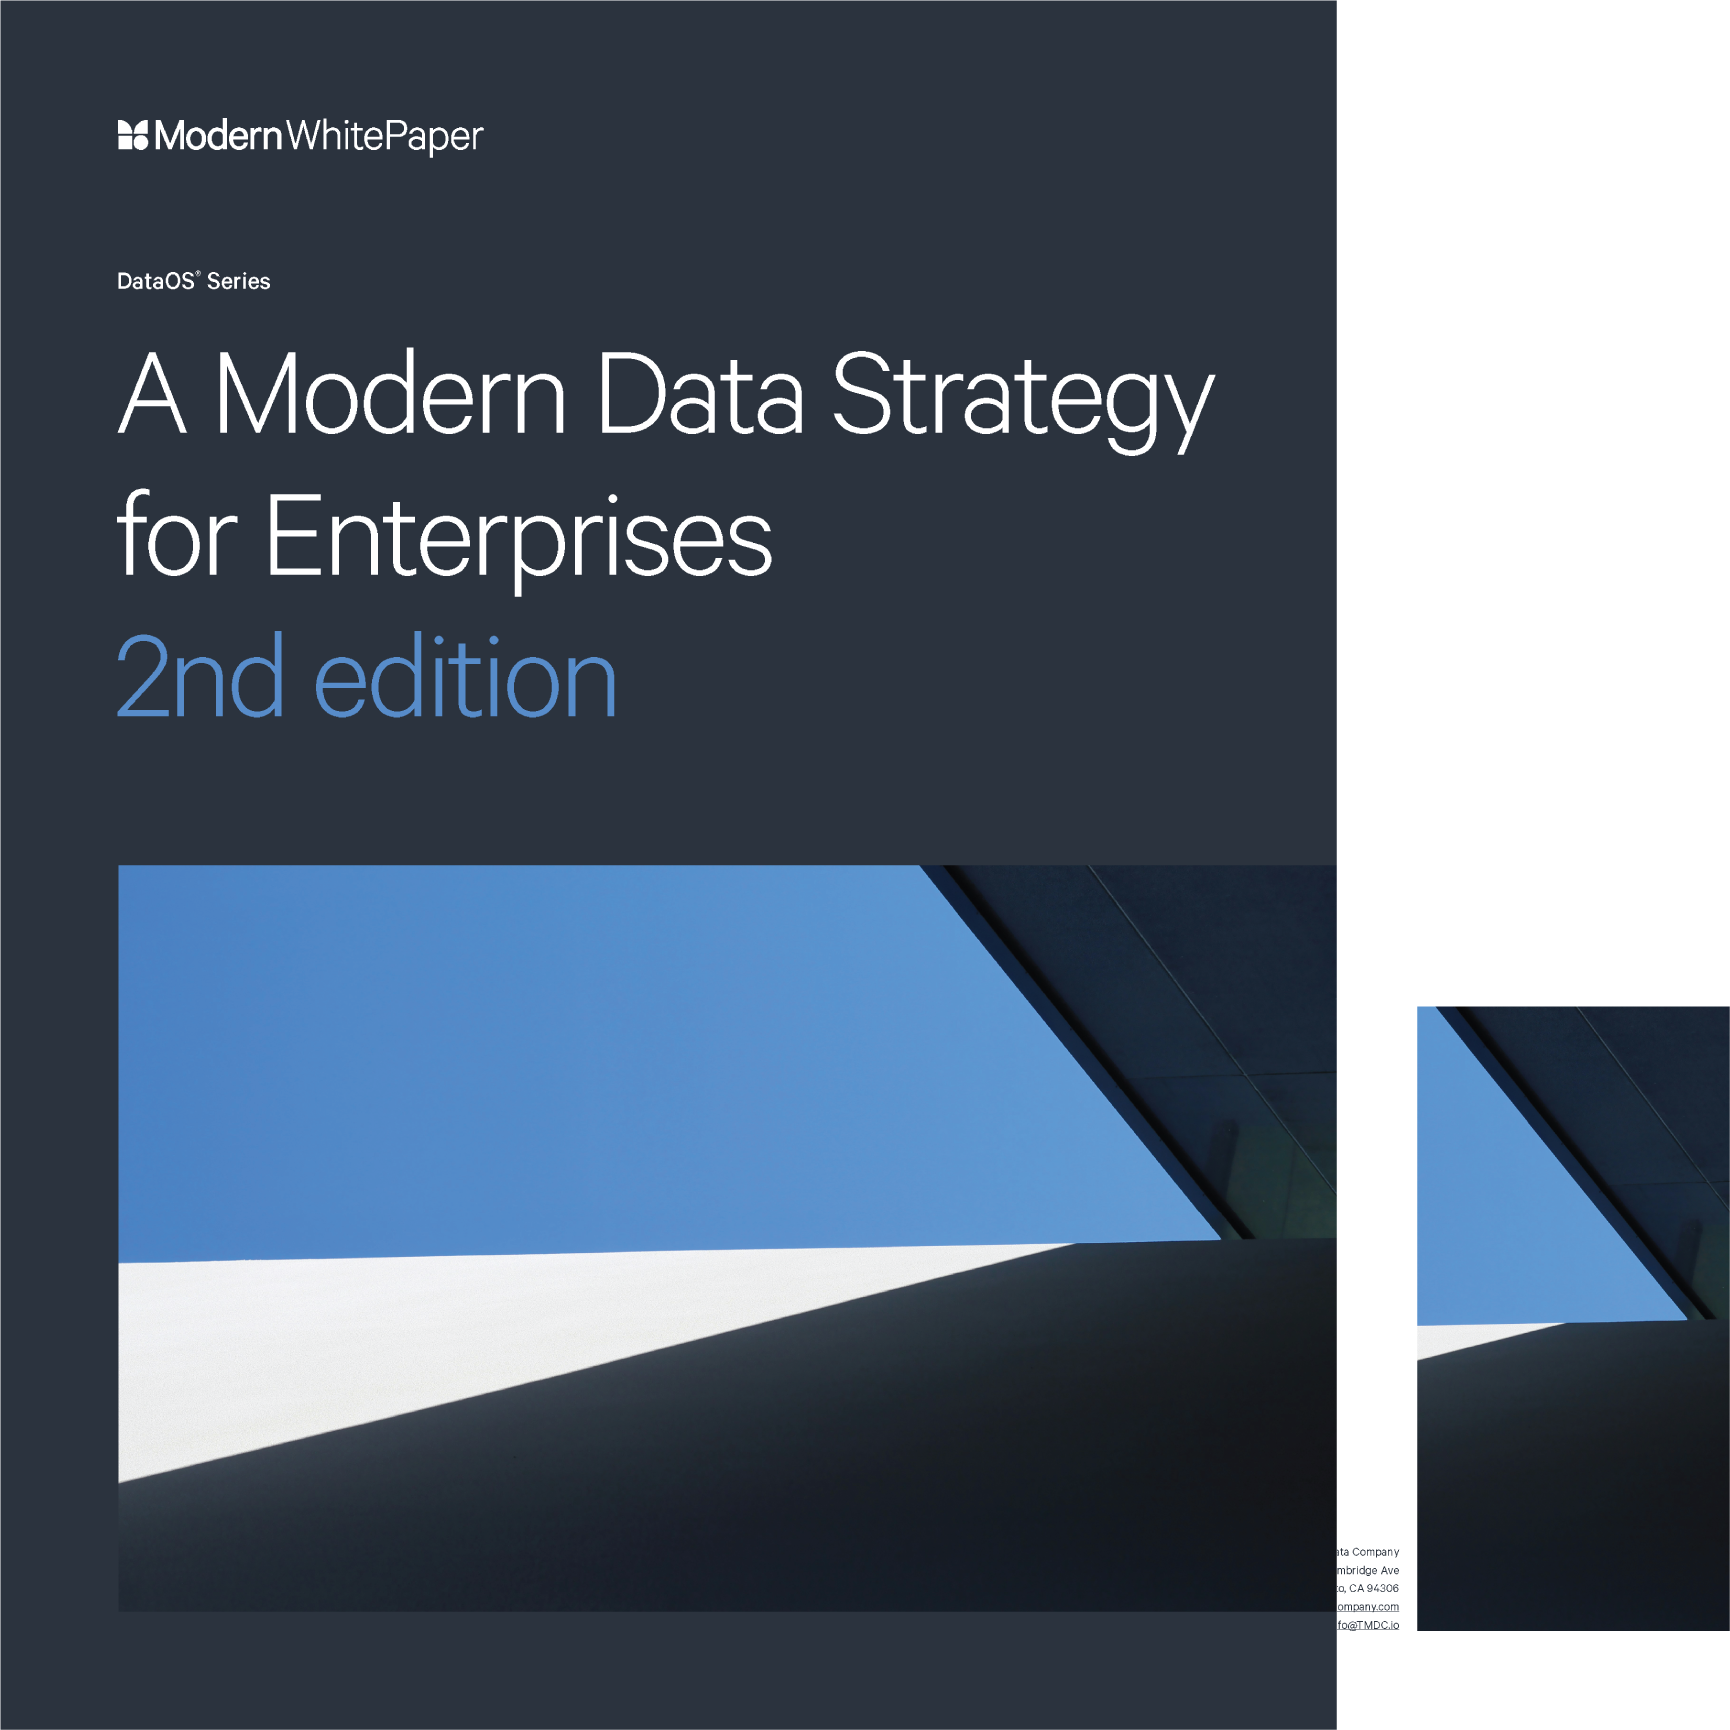 A Modern Data Strategy for Enterprises – 2nd Edition